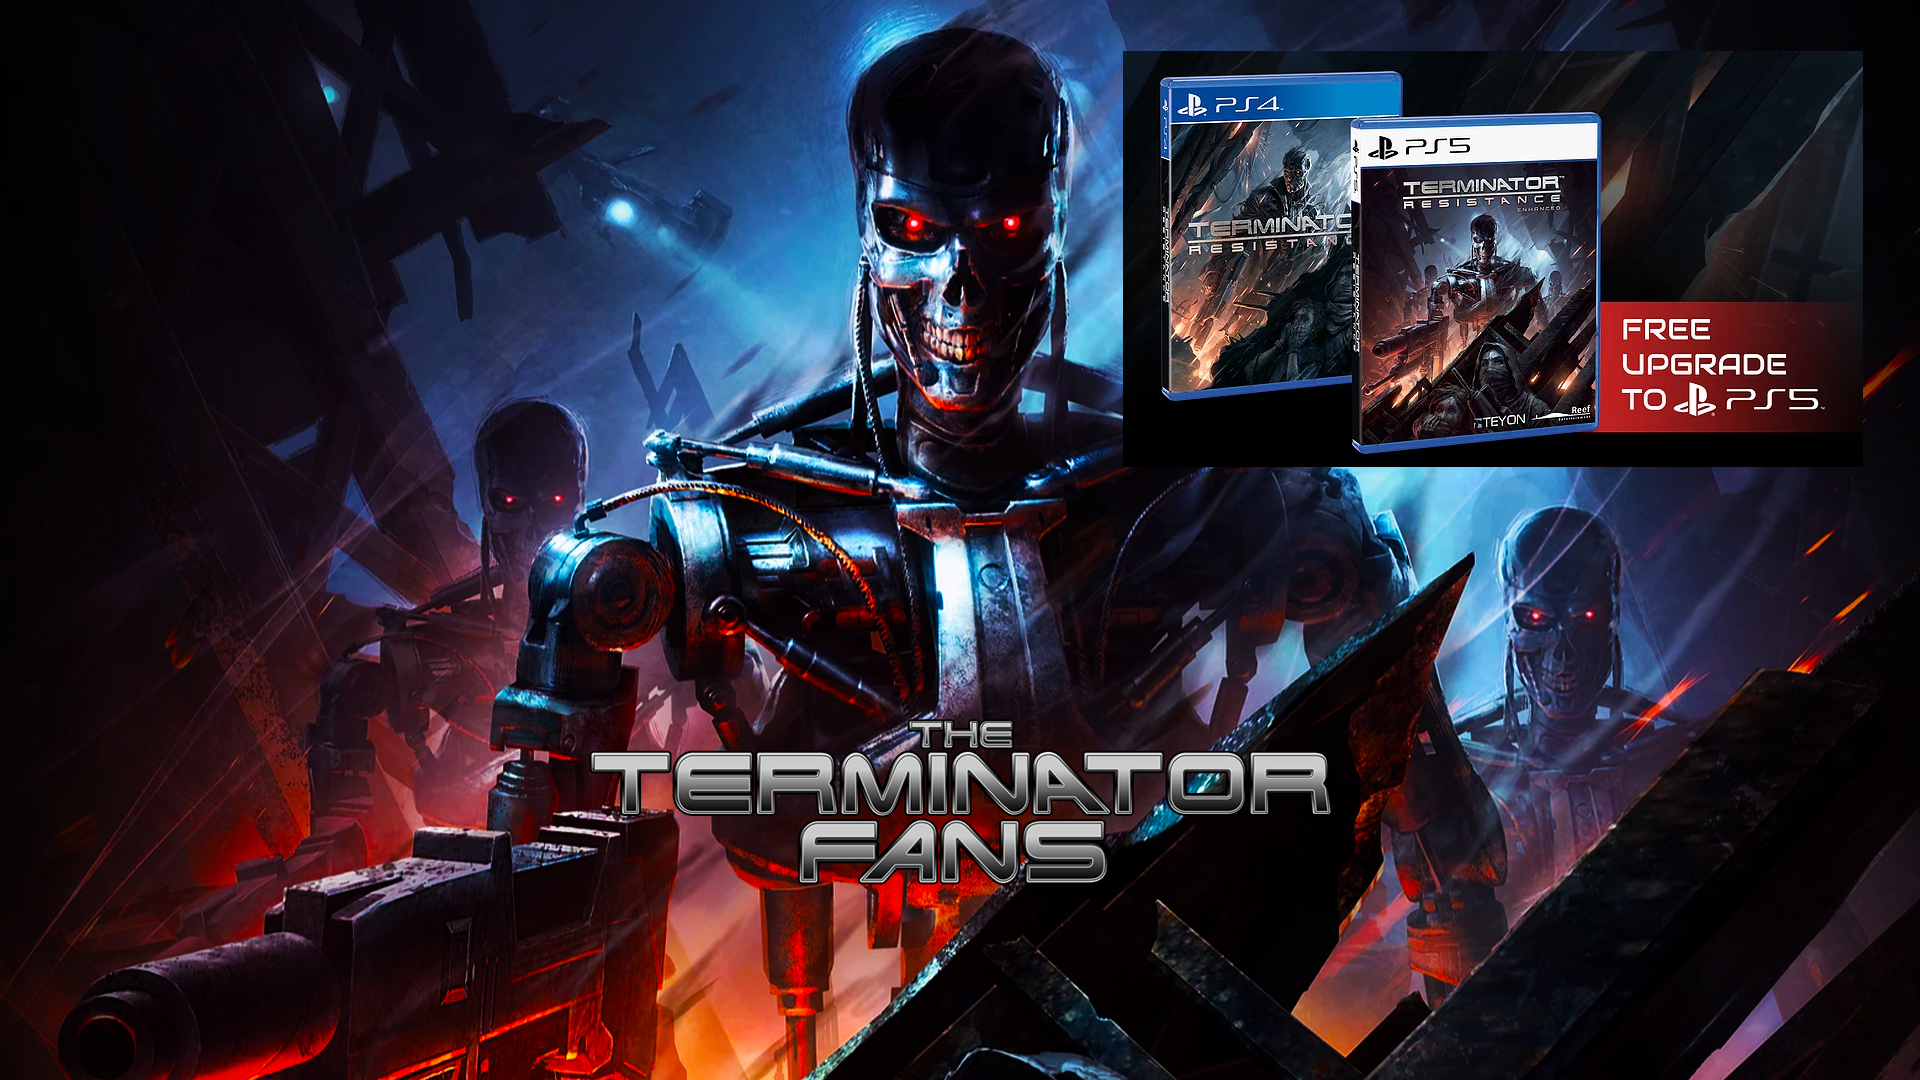 TERMINATOR RESISTANCE ENHANCED Free PS4 to PS5 Upgrade (NOT) Delayed